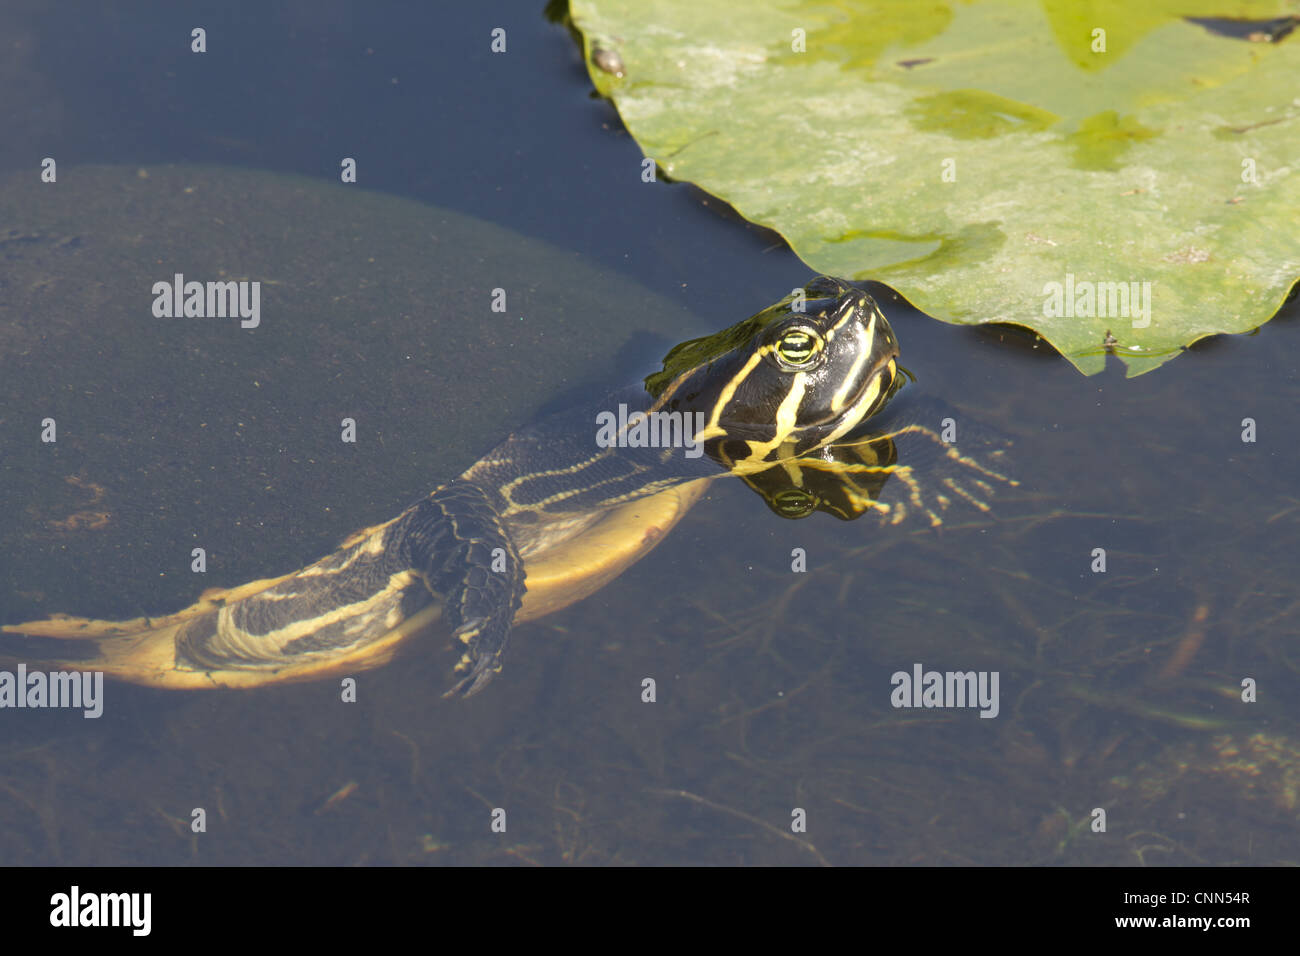 Florida Red-bellied Turtle (Pseudemys nelsoni) adult, at surface of water, Shark Valley, Everglades N.P., Florida, U.S.A. Stock Photo